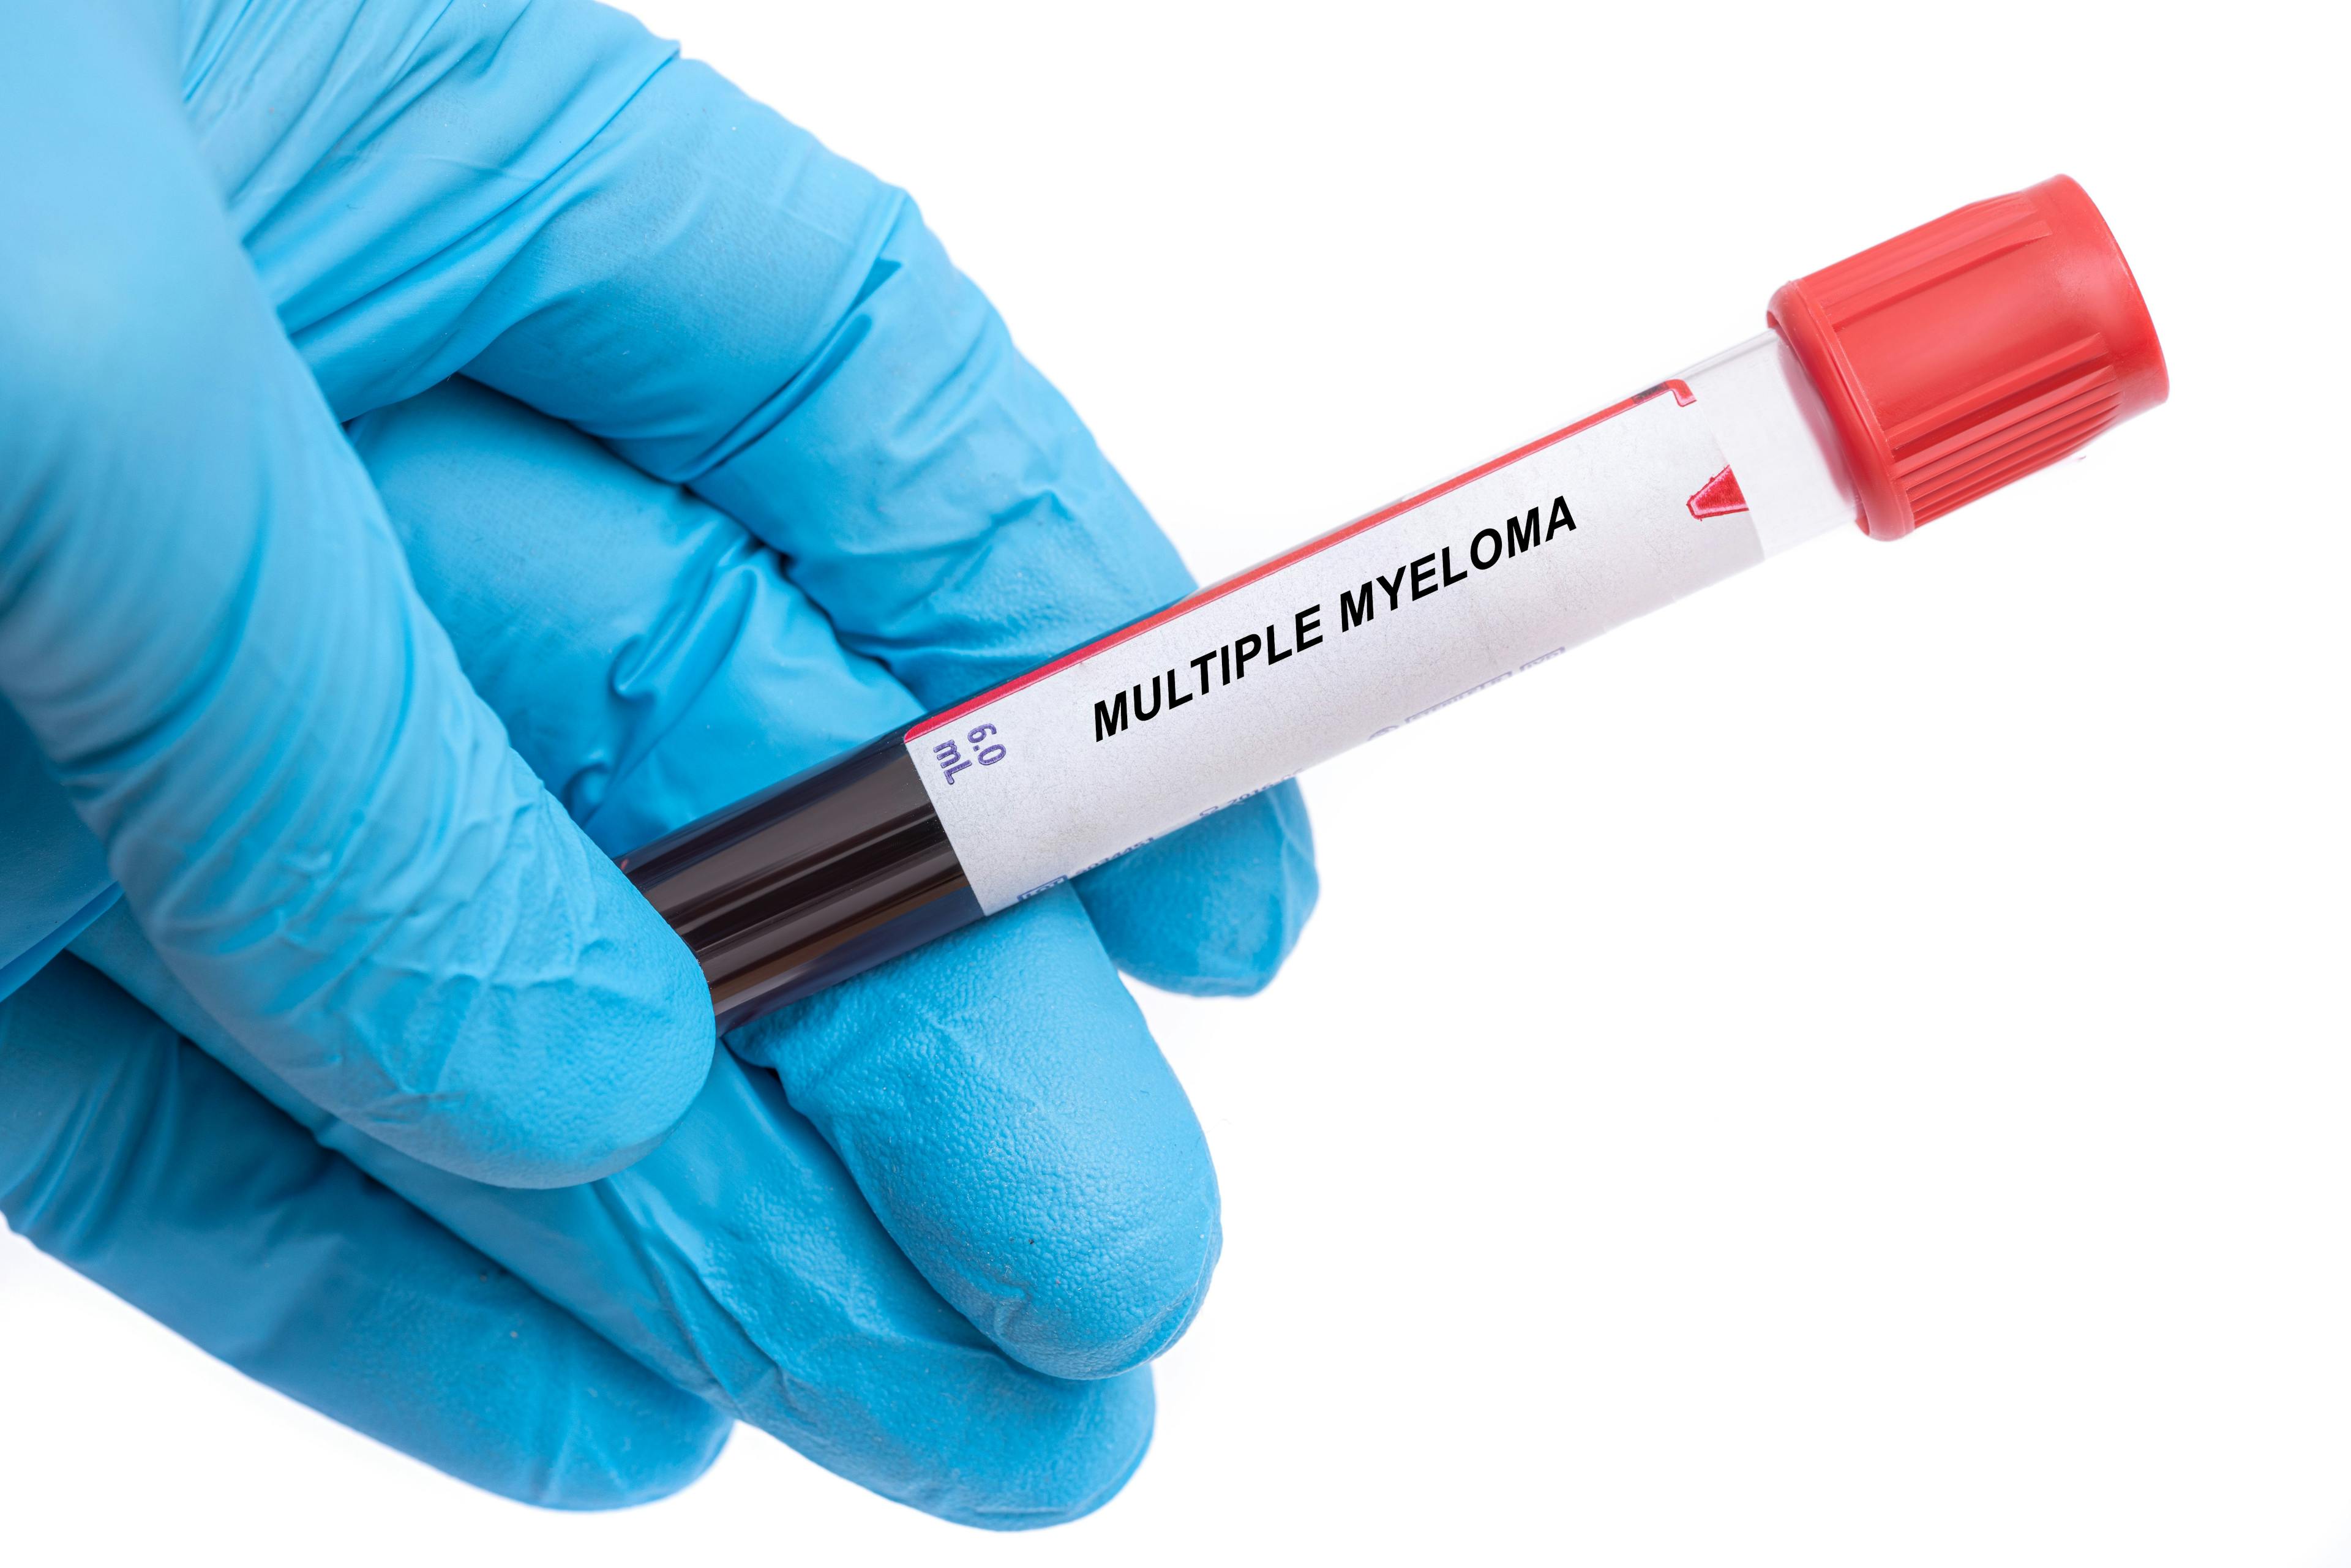 Multiple myeloma blood test in health care worker's hand -- Image credit: luchschenF | stock.adobe.com